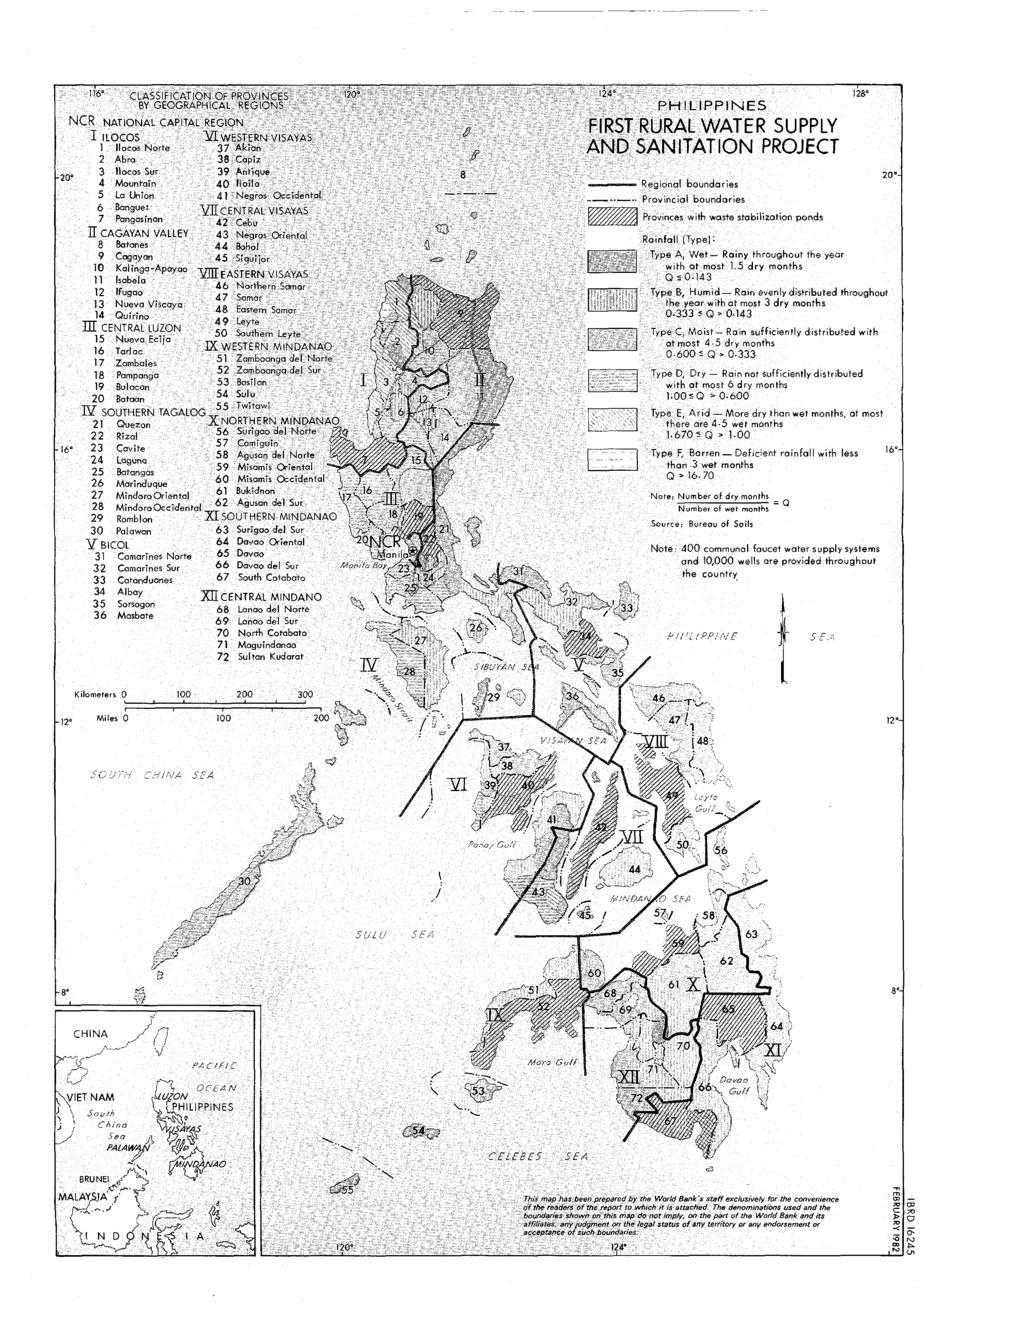 1;6' CLASSIFICATION OF PROVINCES 120' 124' 128' BY GEOGRAPHICAL REGIONS PHILIPPINES NCR NATIONAL CAPITAL REGION FIRST RURAL WATER SUPPLY I ILOCOS VI WESTERN VISAYAS 9FRT I UALW Ihloos ERSP Y Norte 37